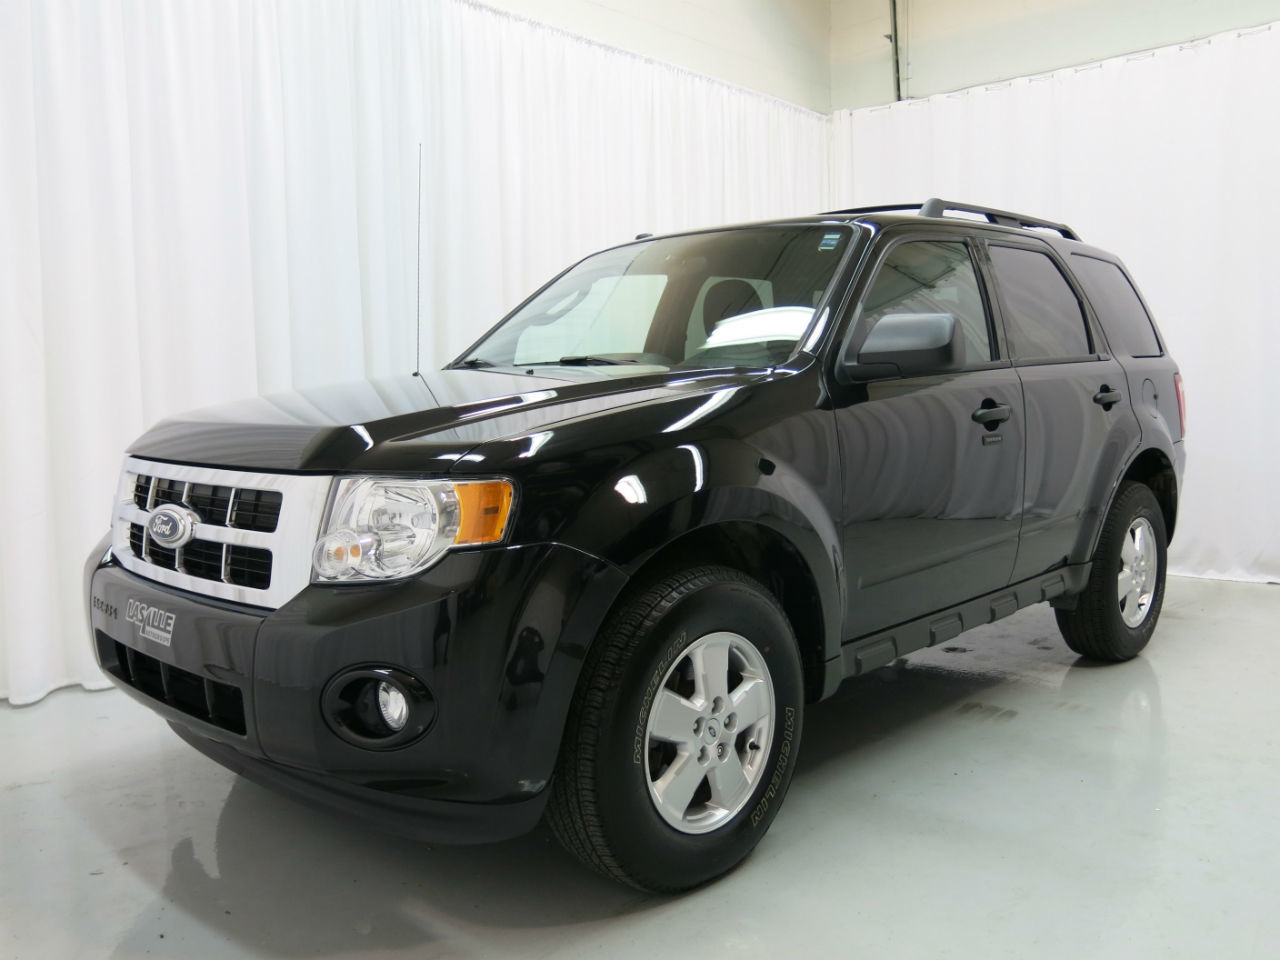 Buy used ford escape montreal #1